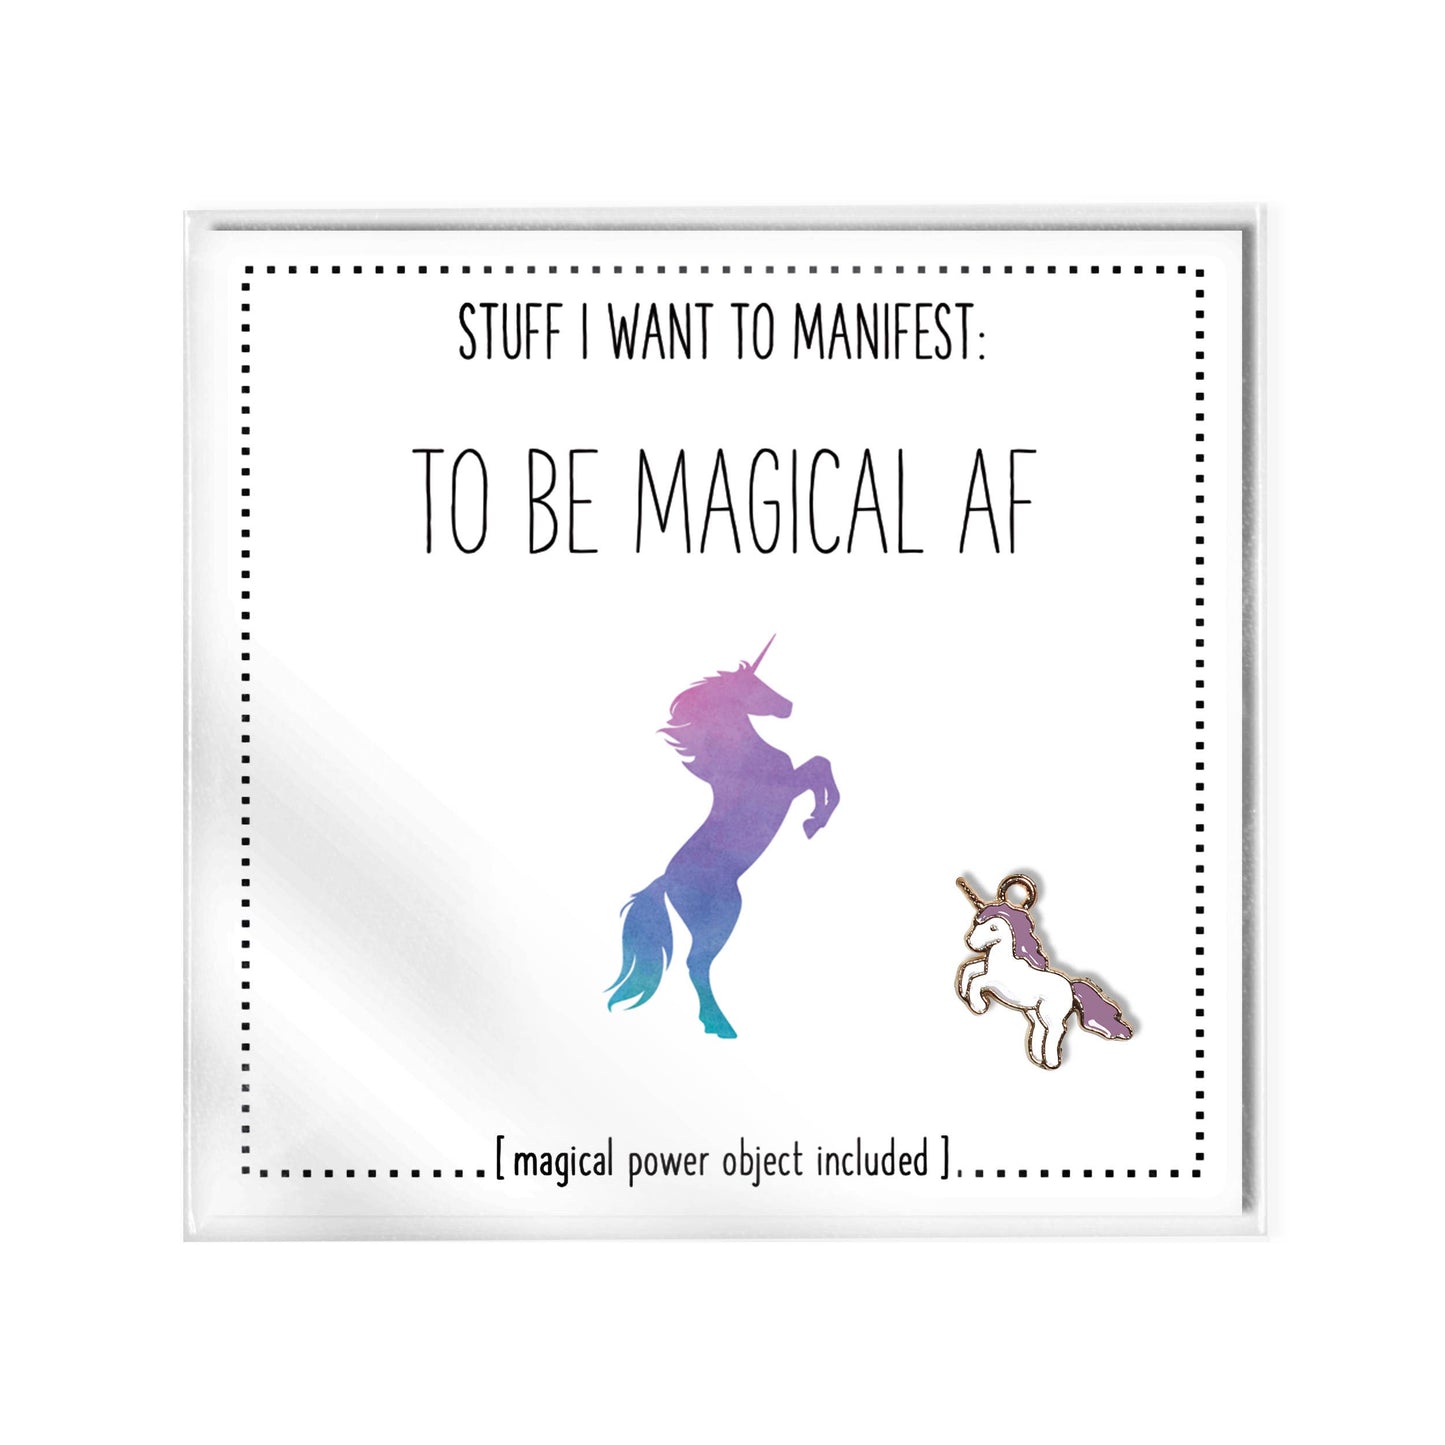 Stuff I Want To Manifest: To Be Magical AF